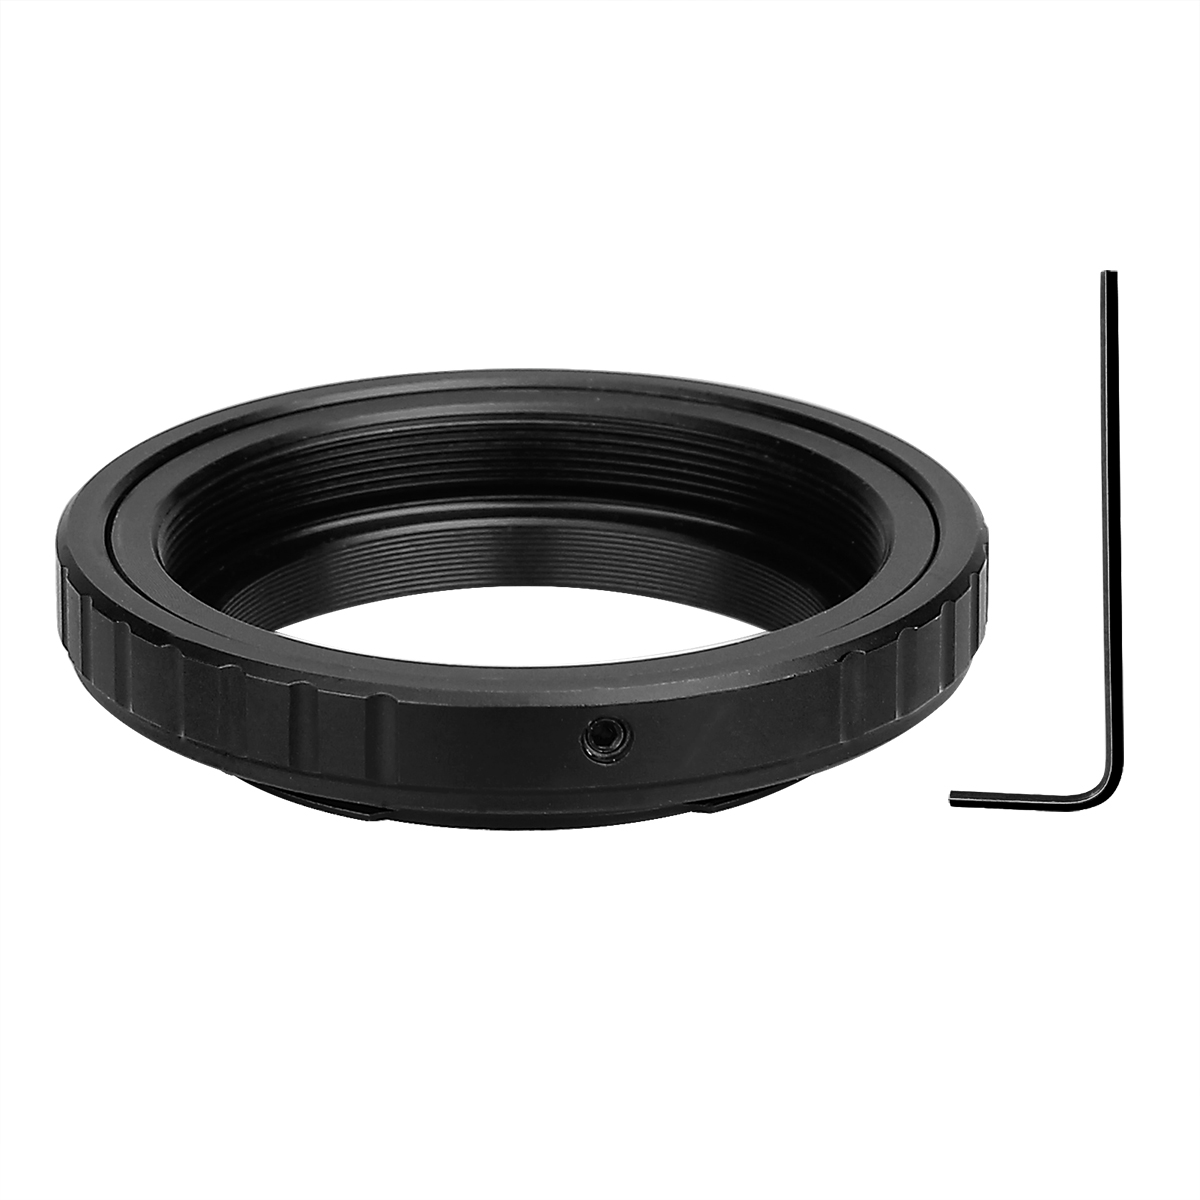 M48 T-Ring Adapter for Nikon